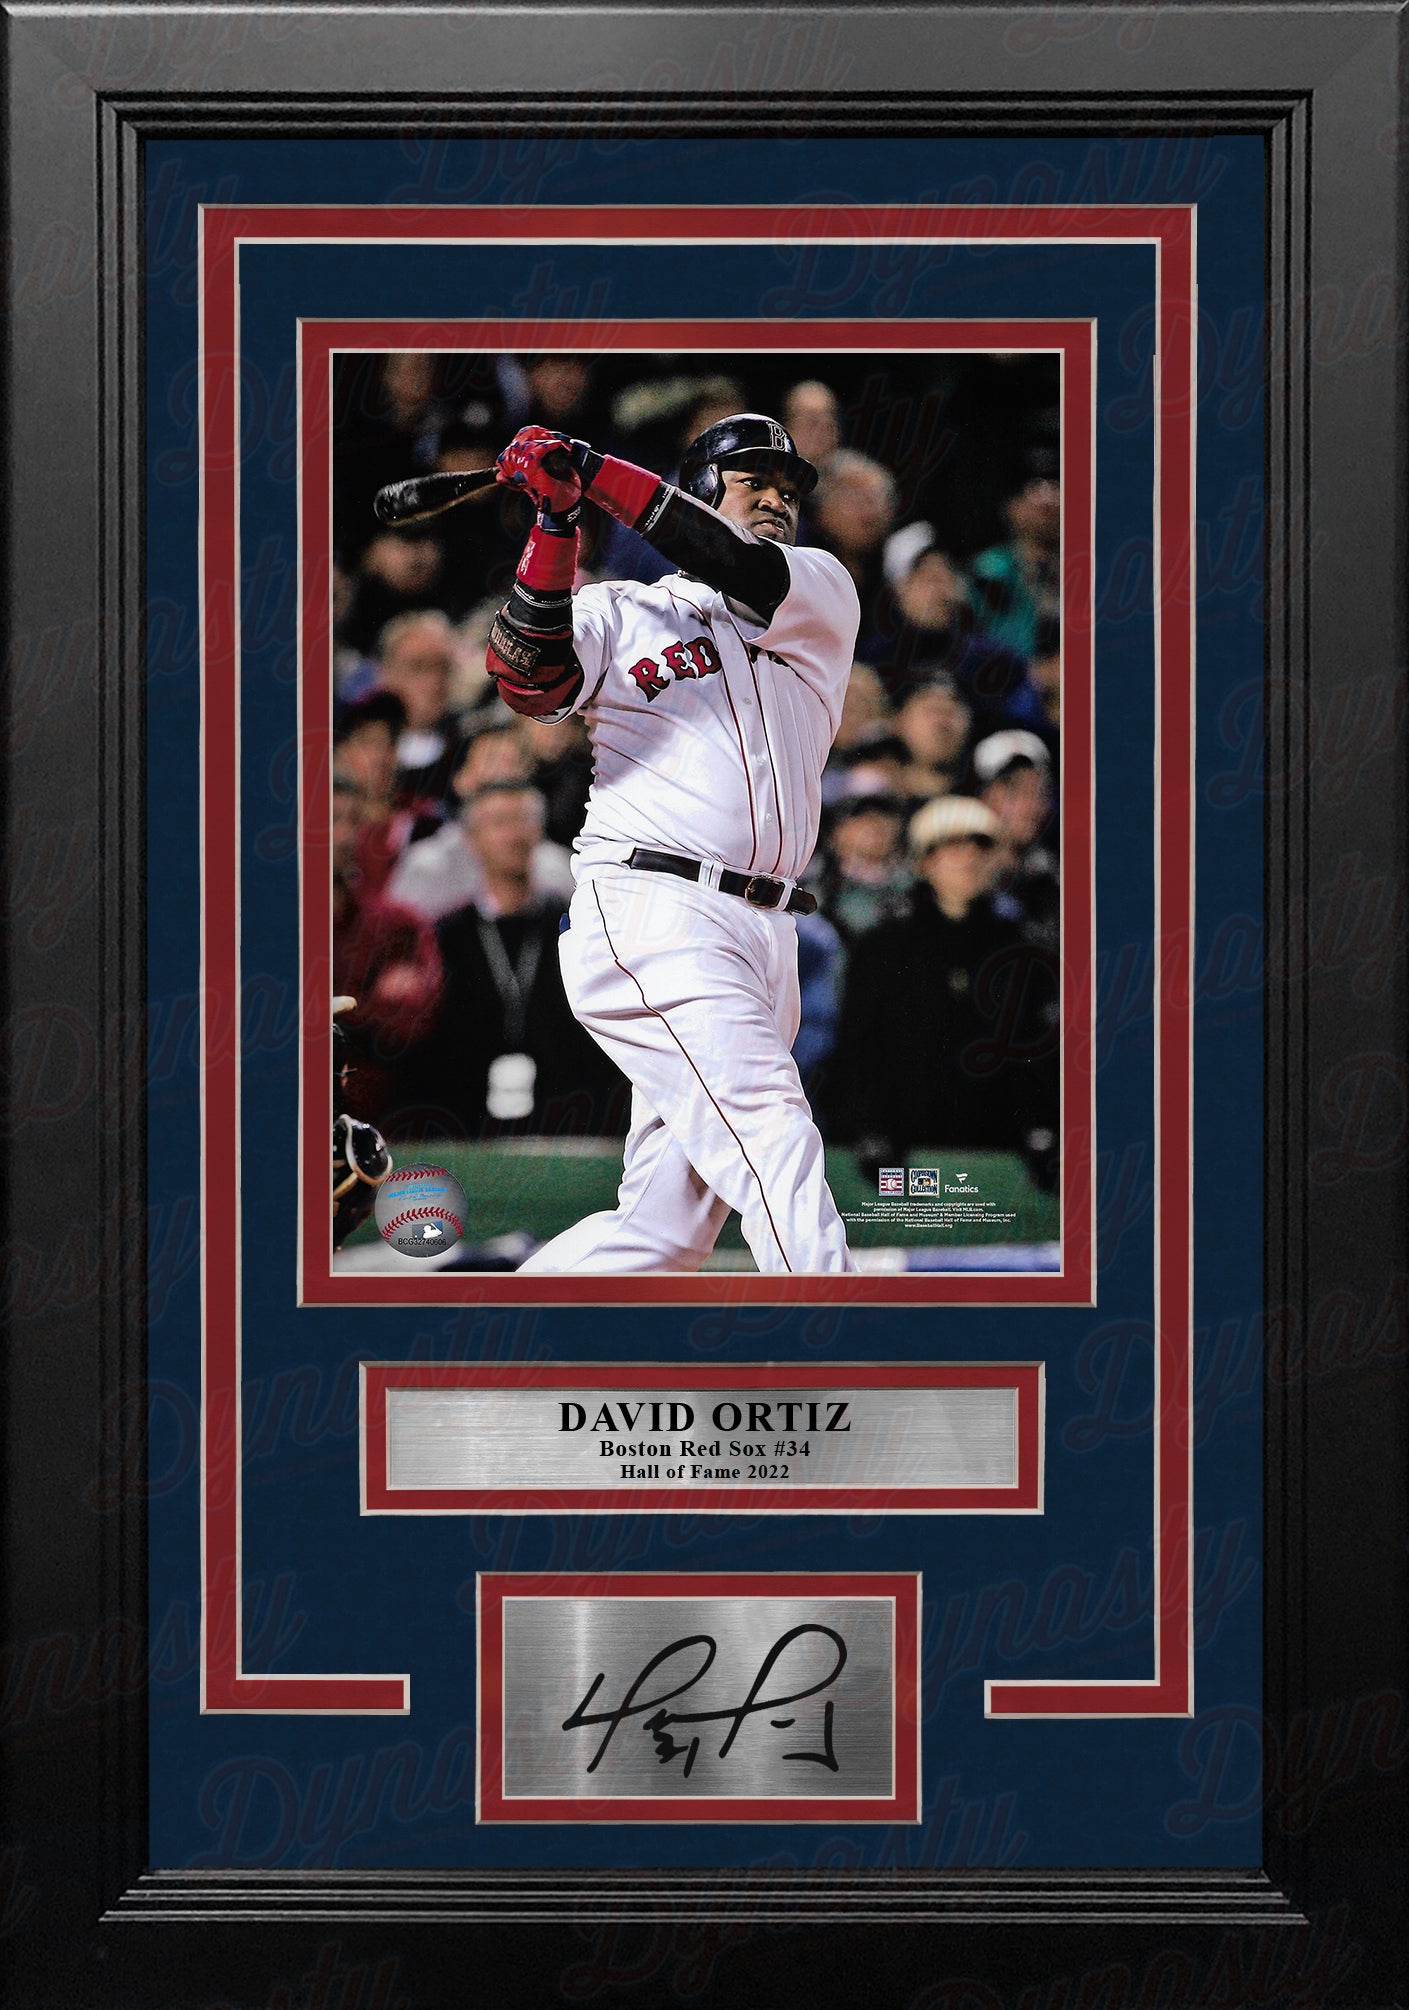 David Ortiz in Action Boston Red Sox 8" x 10" Framed Baseball Photo with Engraved Autograph - Dynasty Sports & Framing 